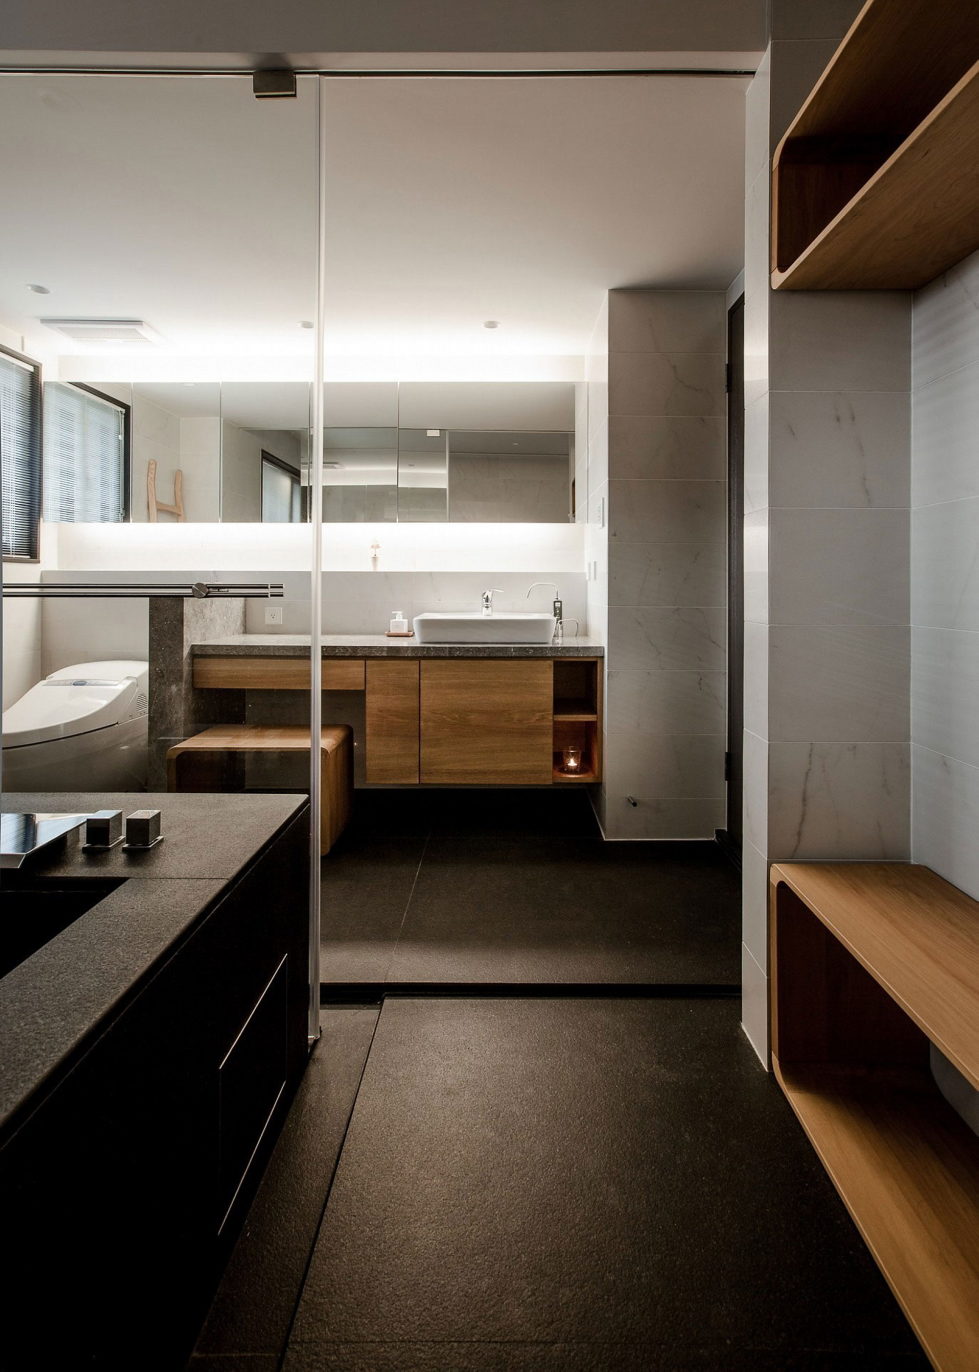 The Wang House Apartment In Taiwan Upon The Project Of The PM Design Studio 49